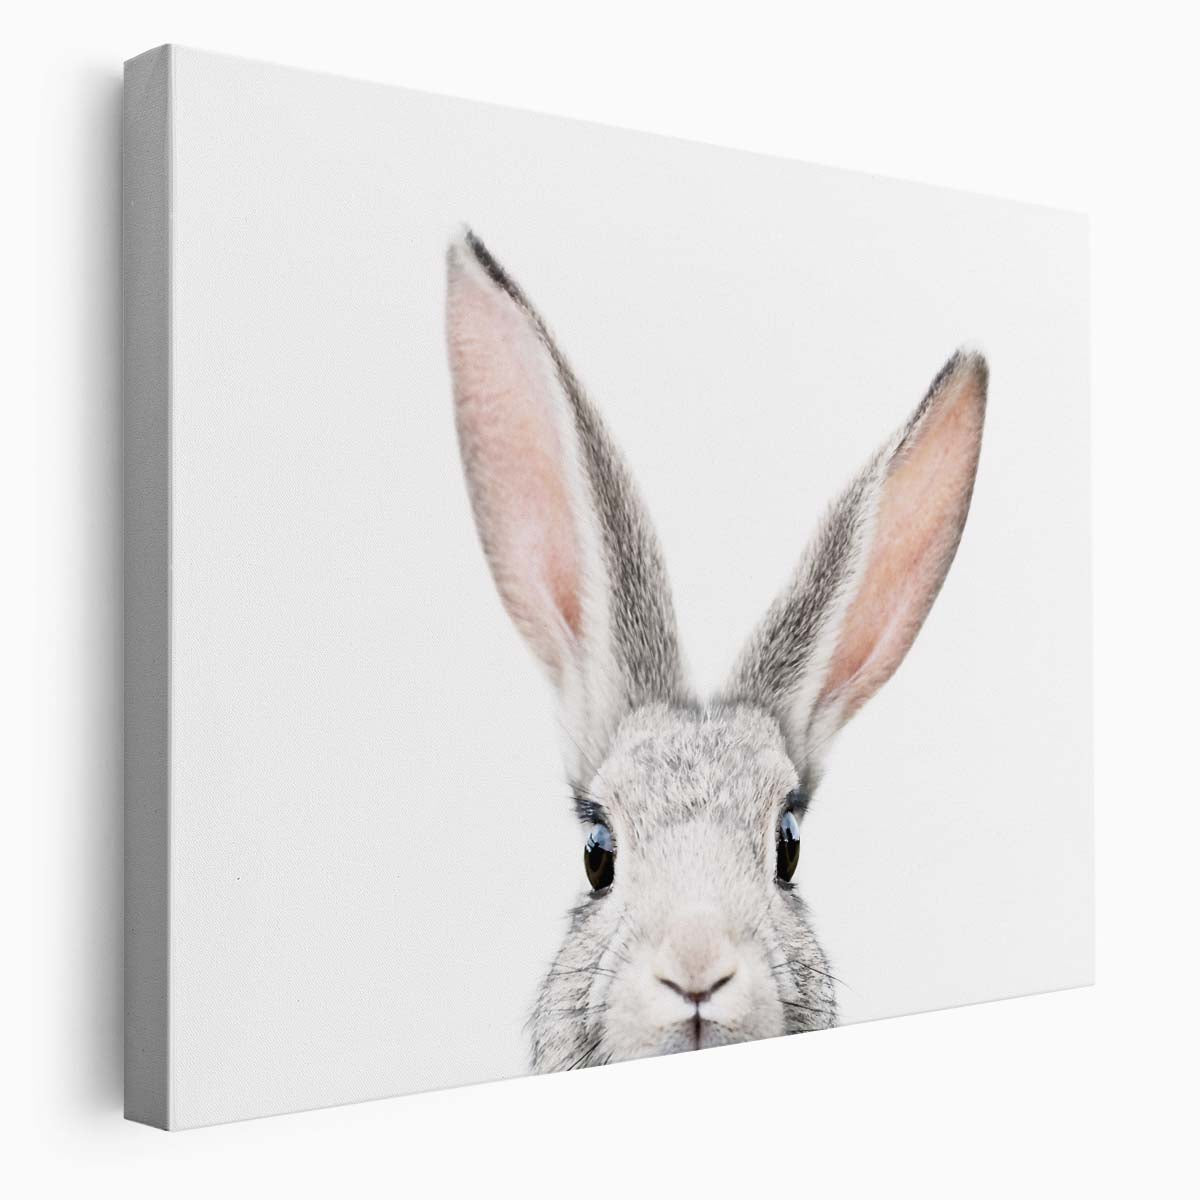 Cute Bunny Portrait on Bright Background - Wildlife Photography Wall Art